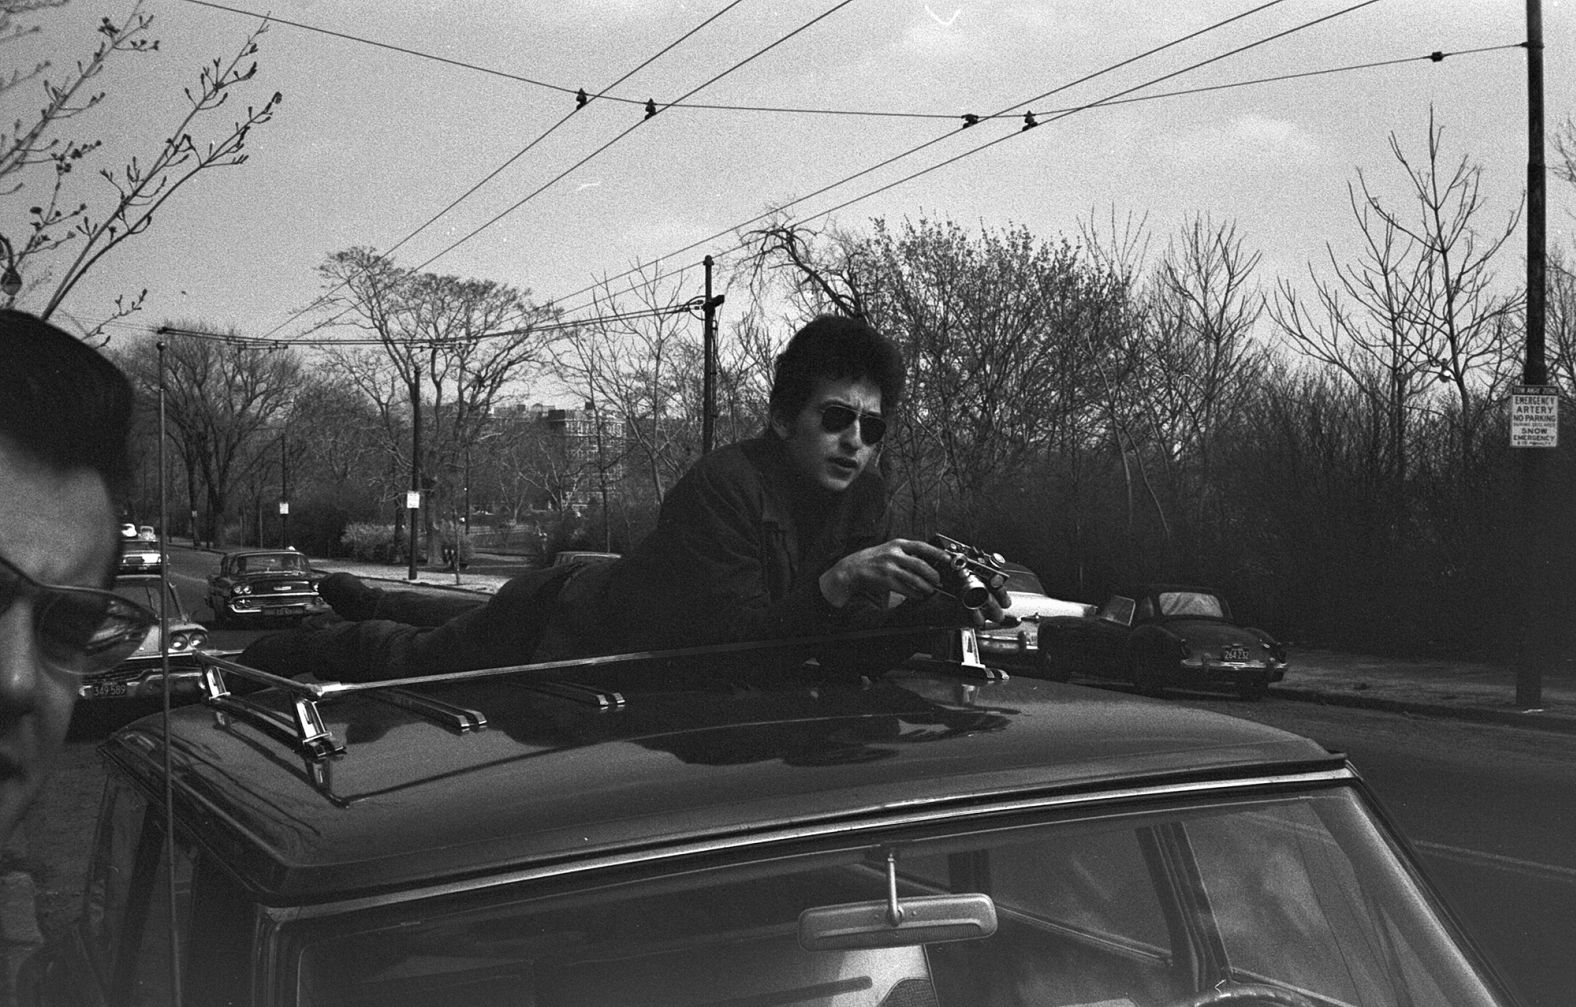 Dylan holds a camera on the top of a car in Massachusetts in 1964.